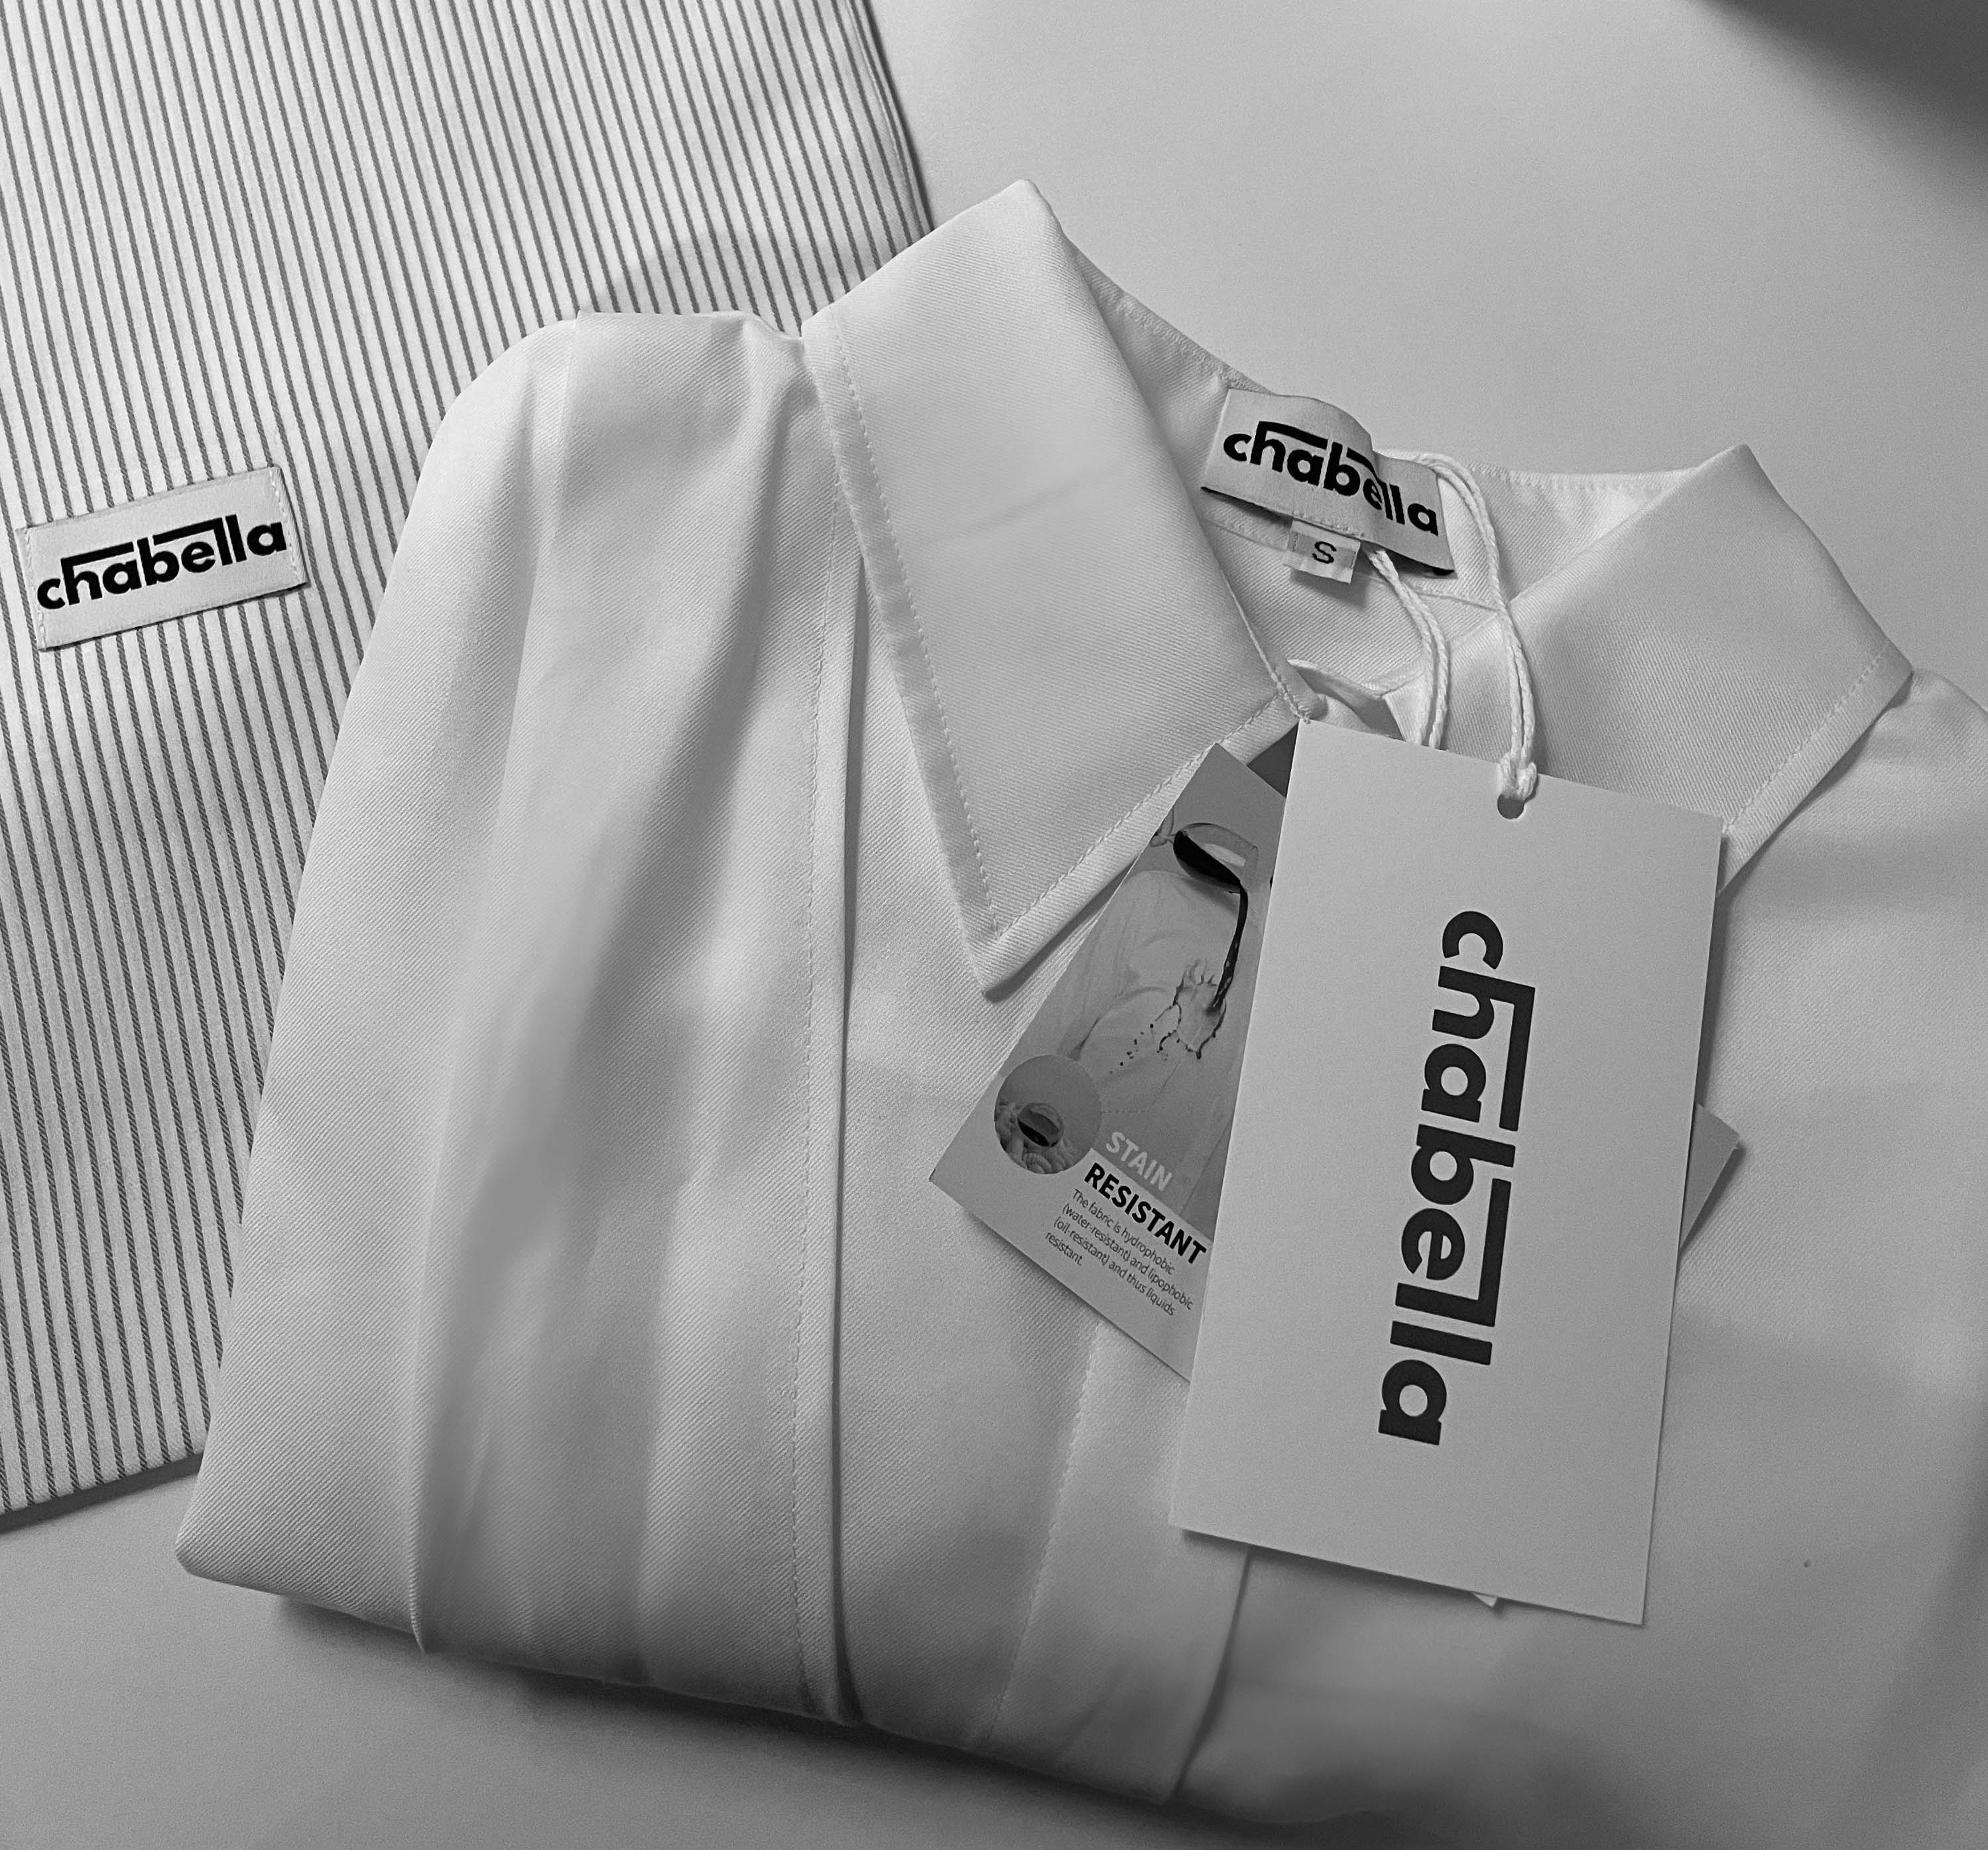 CHABELLA CAMISA button-down cotton shirt unboxing